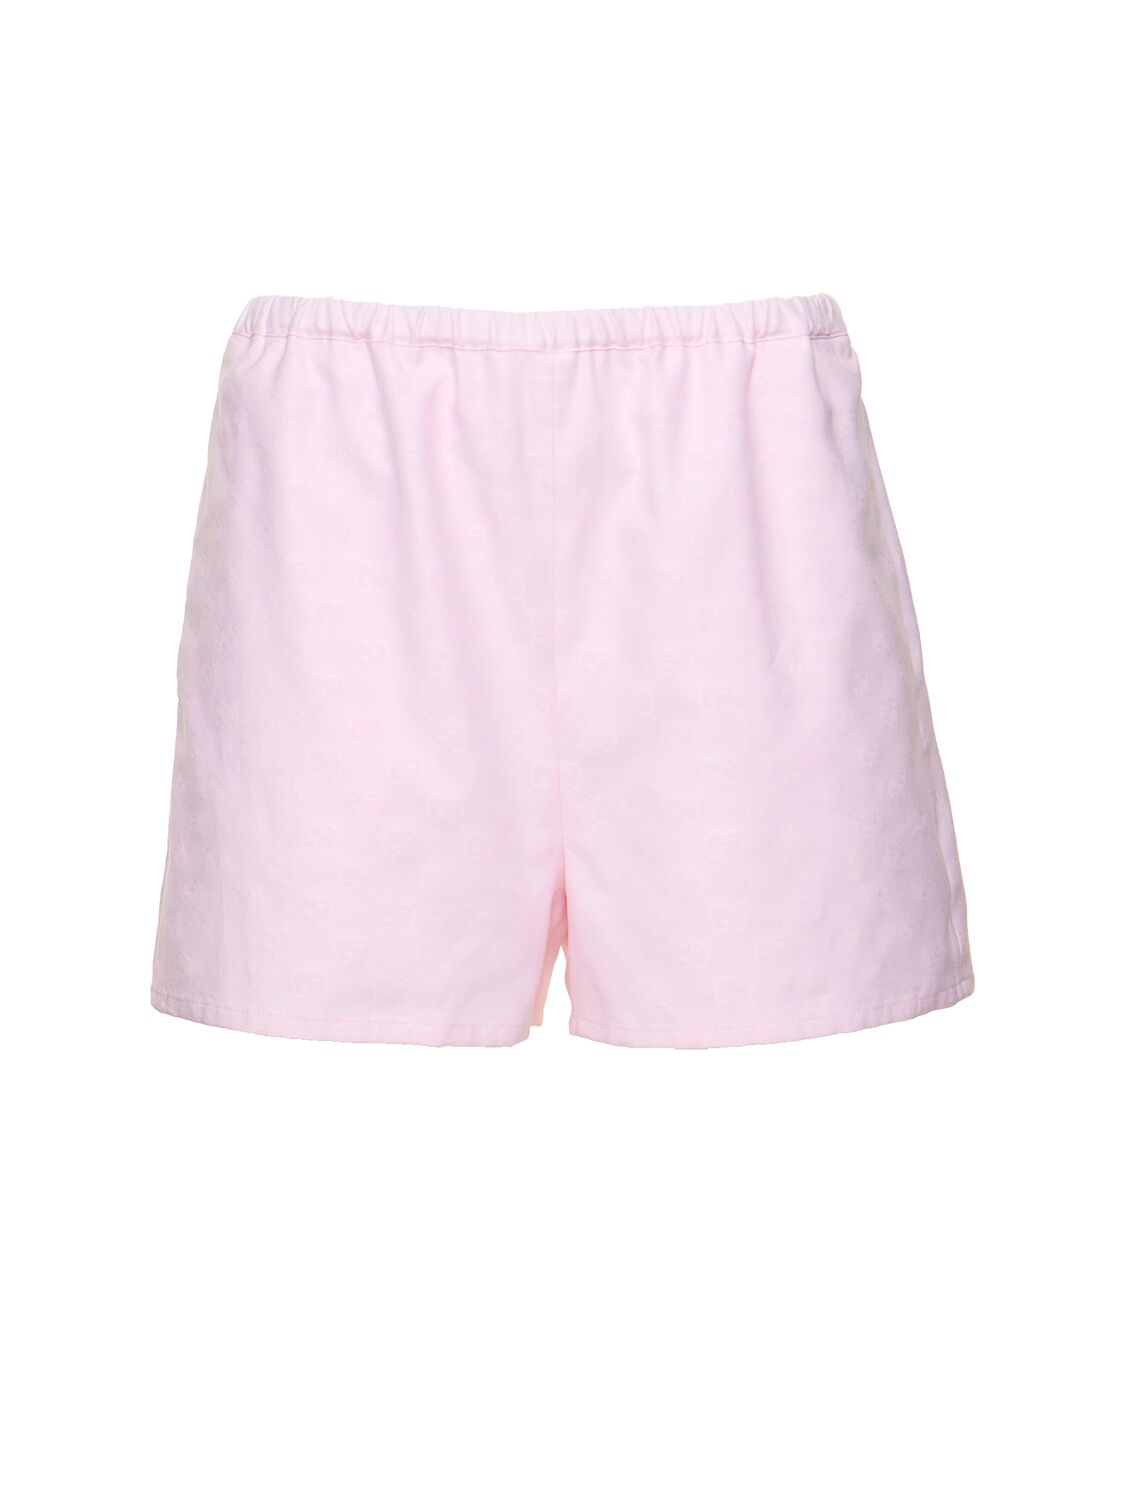 Gucci Gg Supreme Cotton Shorts In Pink Rose